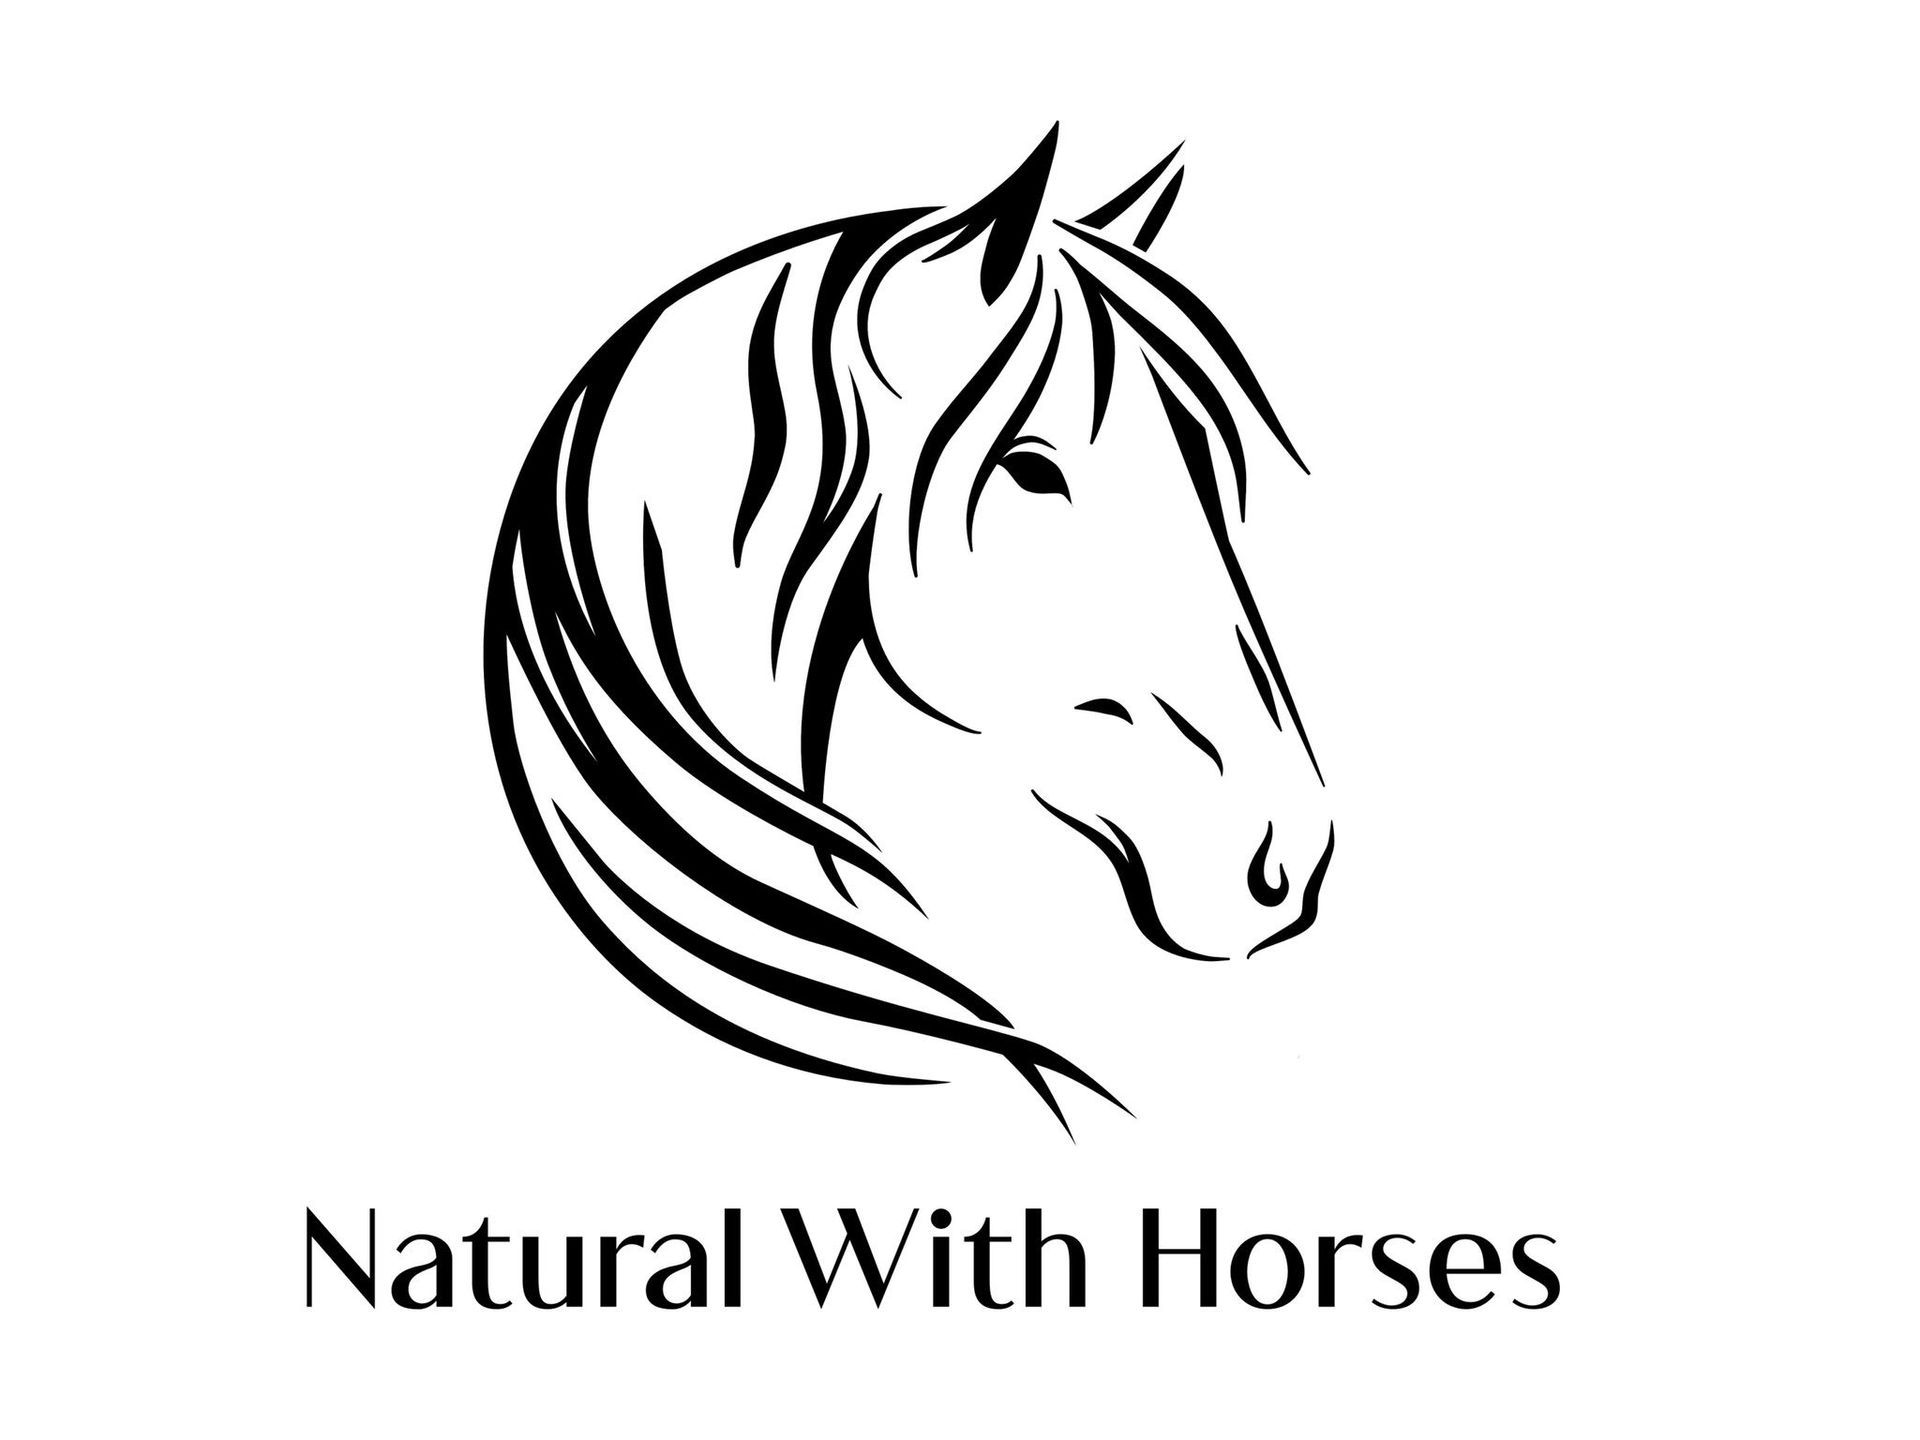 Natural with horses logo